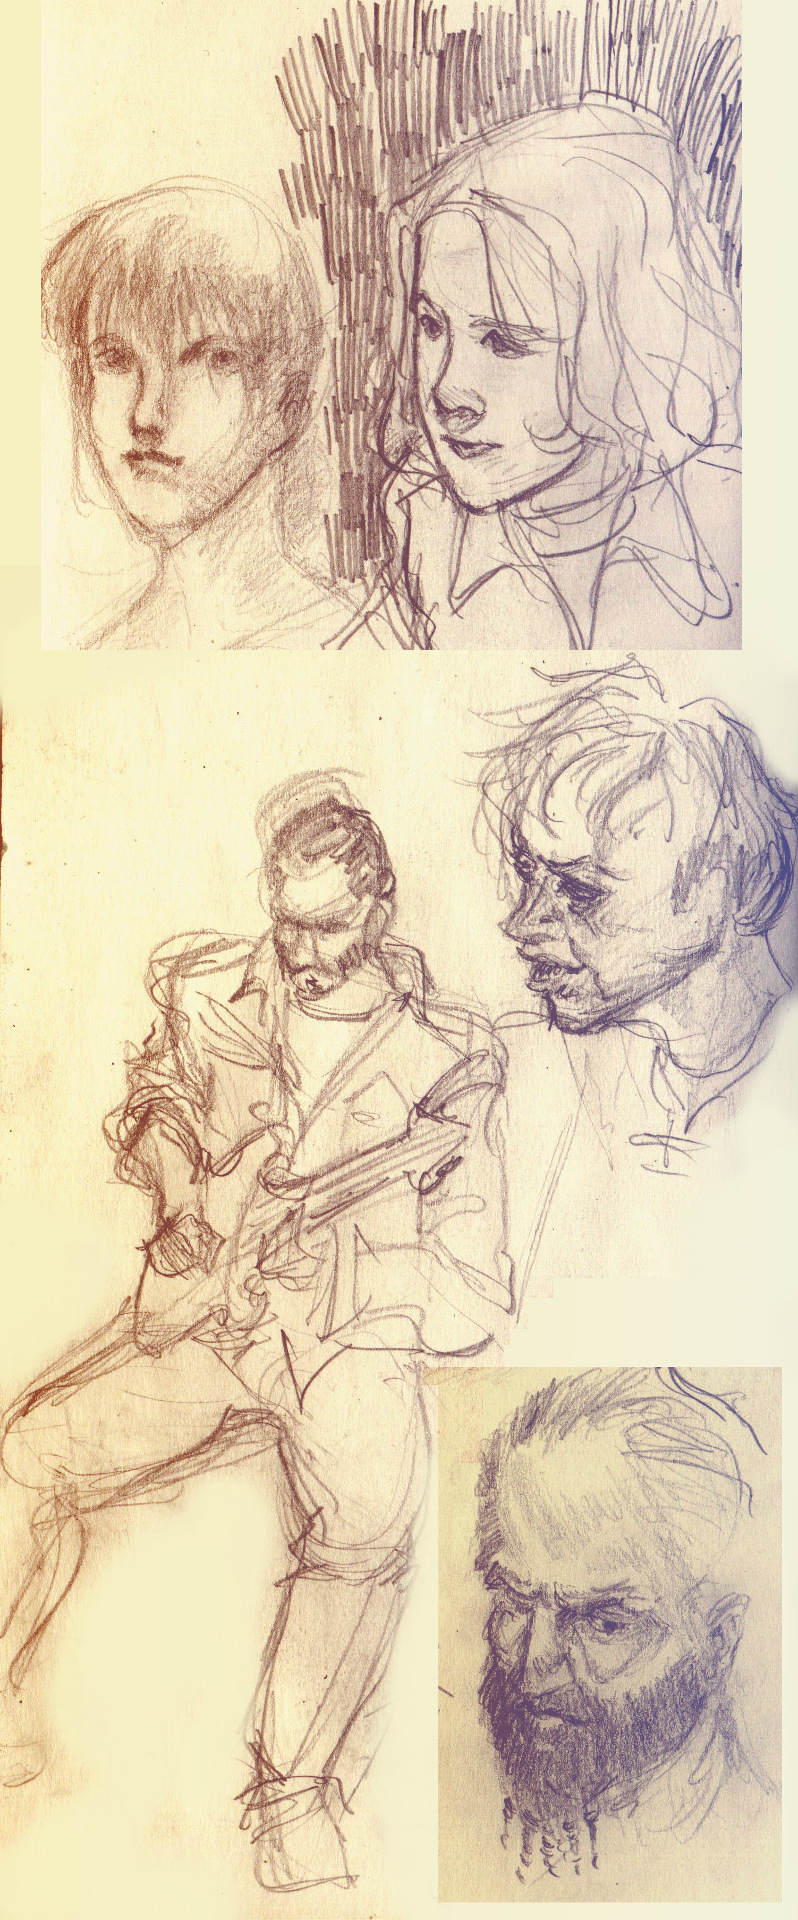 Some Sketchs 2015